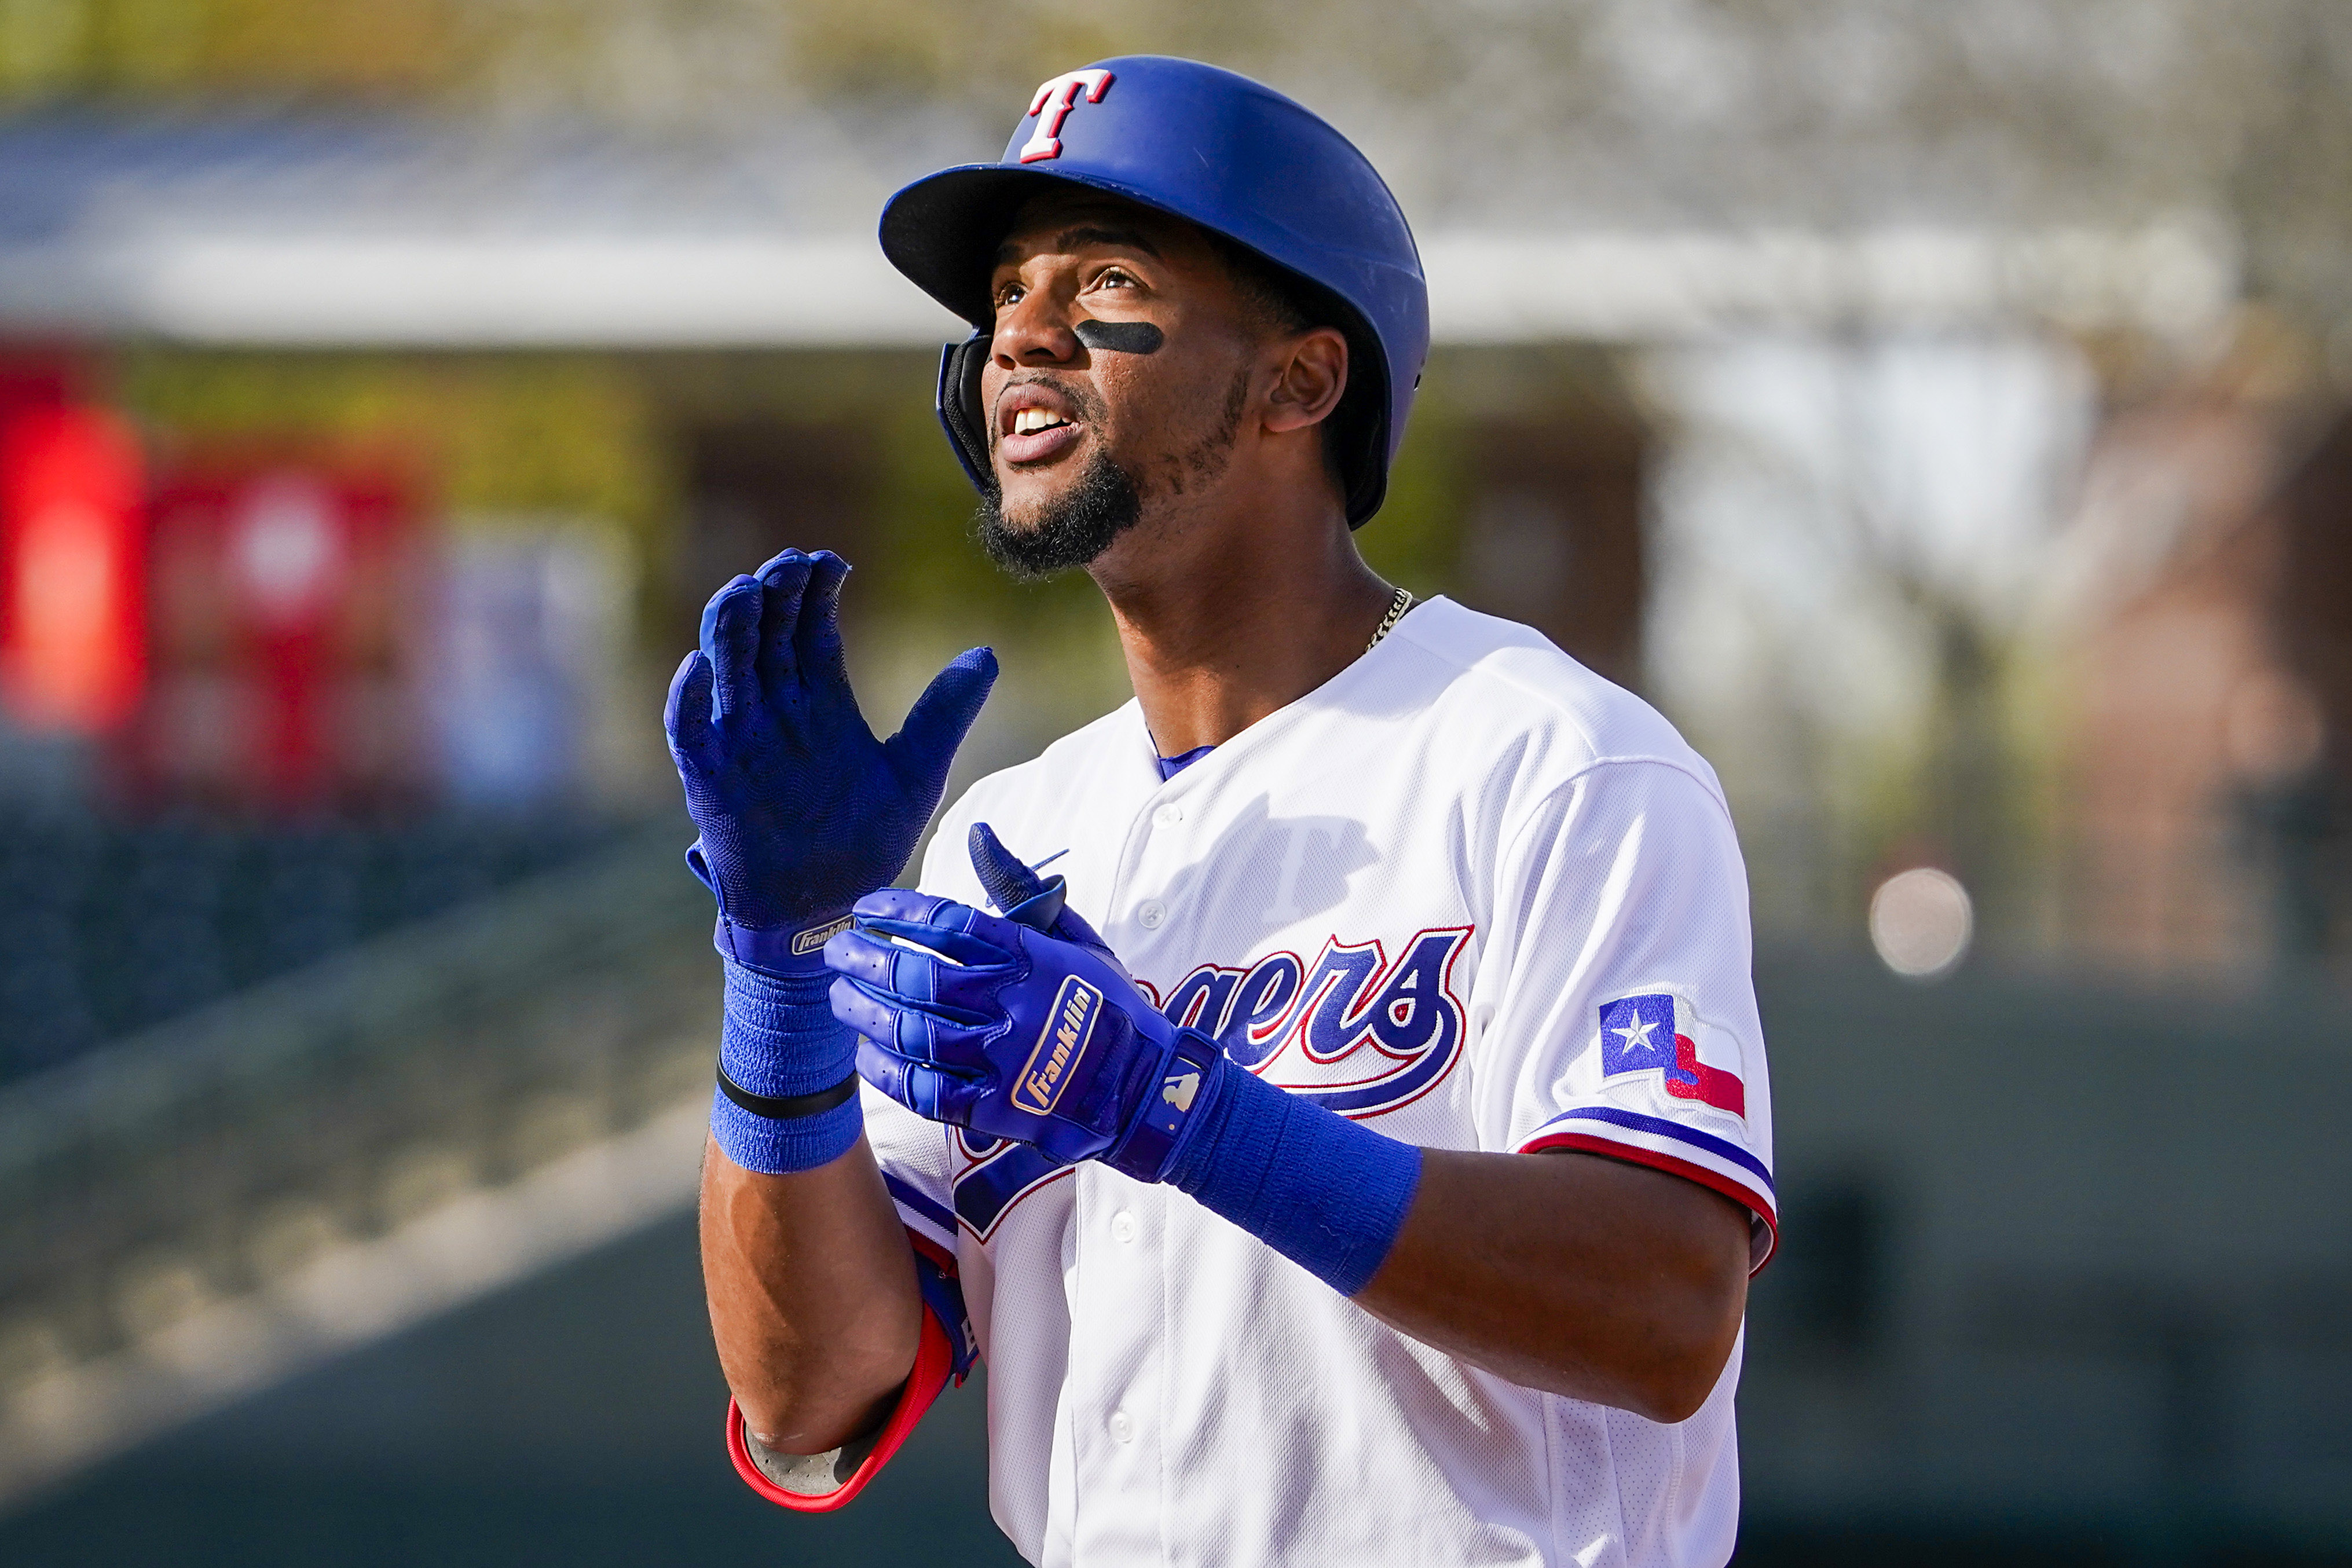 Rangers finalize opening day roster with some surprises, including